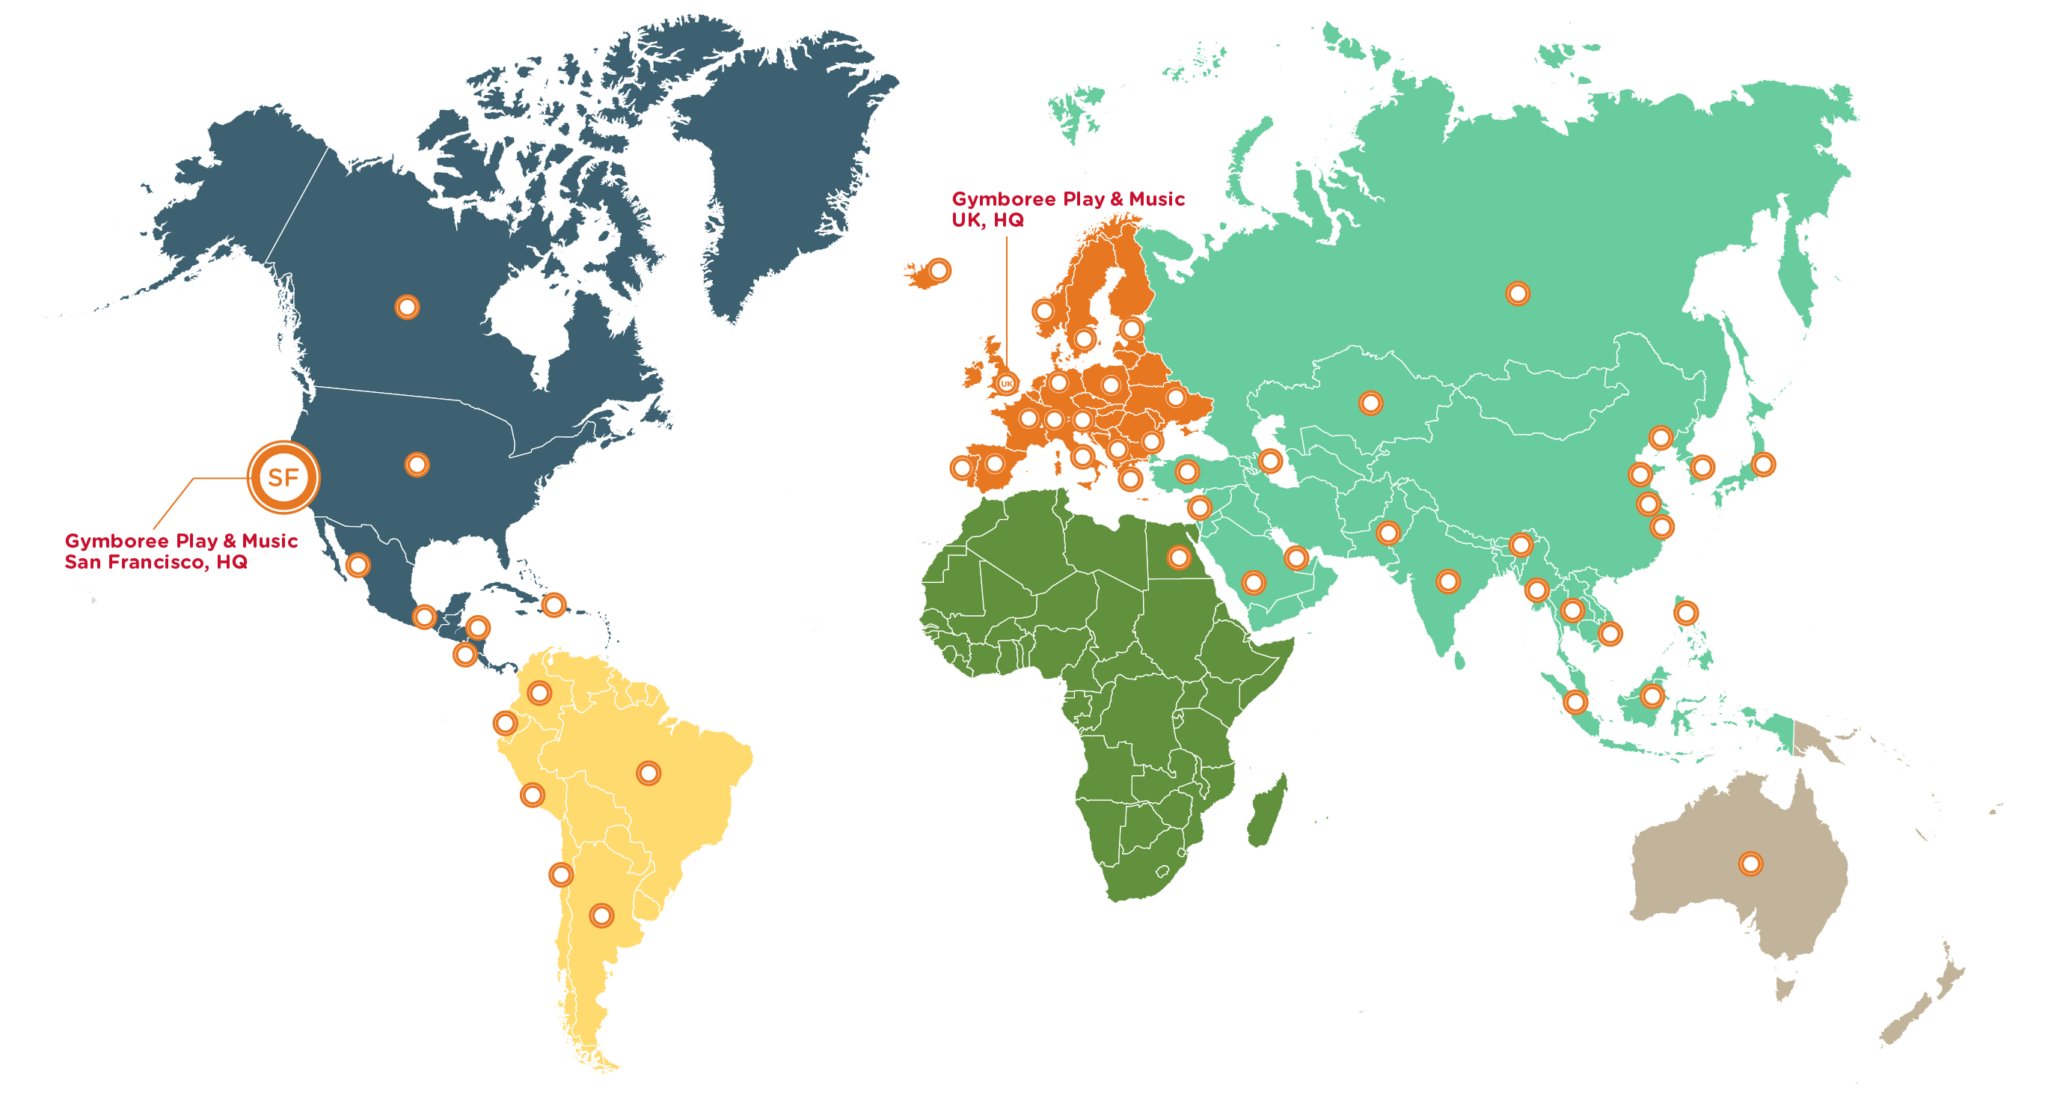 world map showing Gymboree Play & Music locations